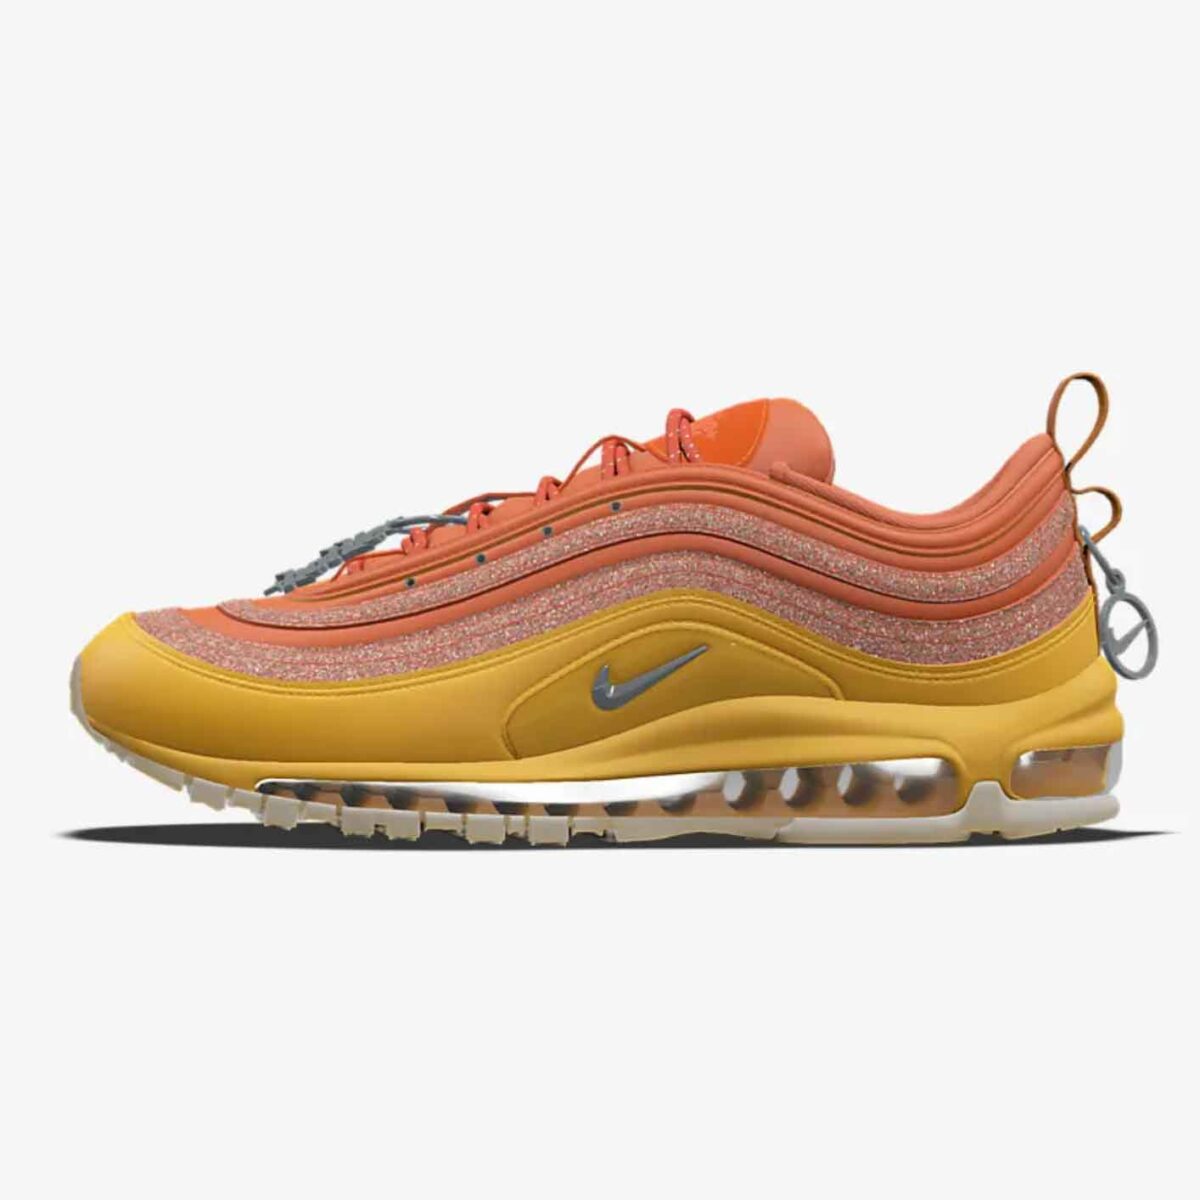 Megan Thee Stallion x Nike Air Max 97 "Something For Thee Hotties By You" FZ4048-900